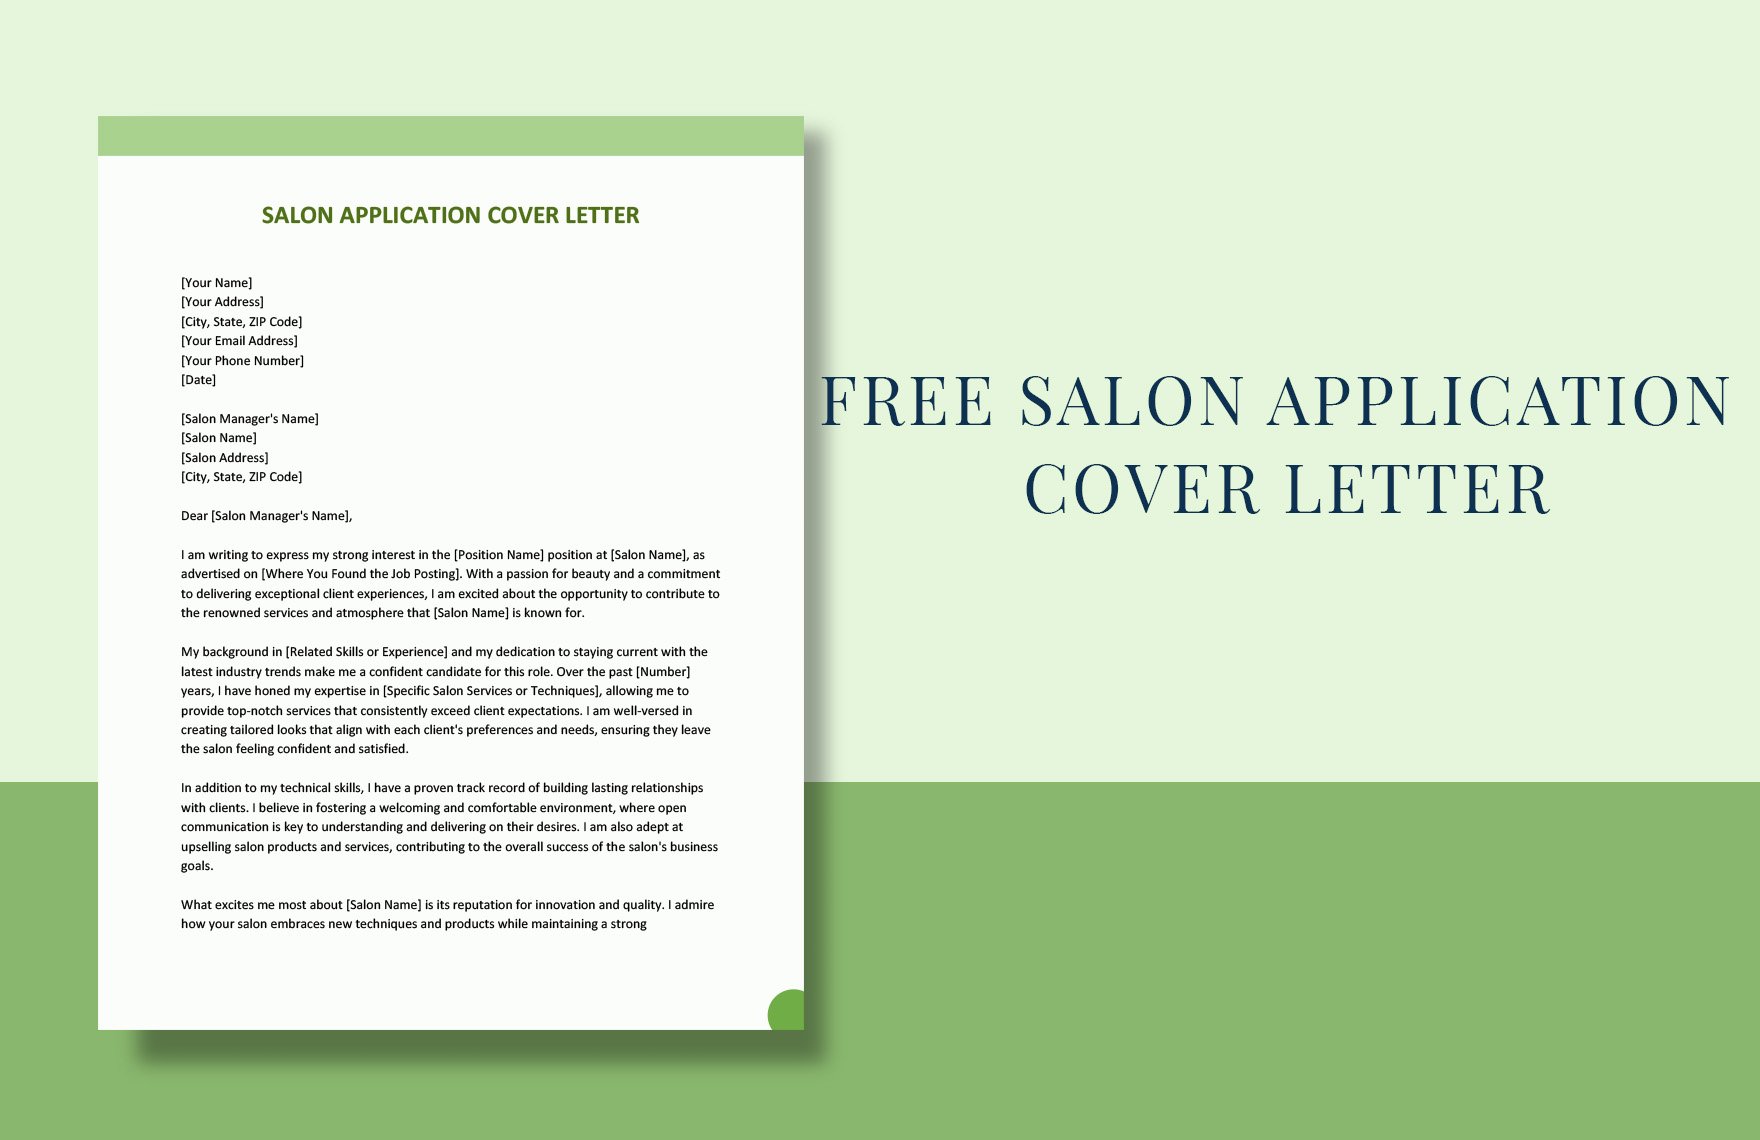 Salon Application Cover Letter in Word, Google Docs